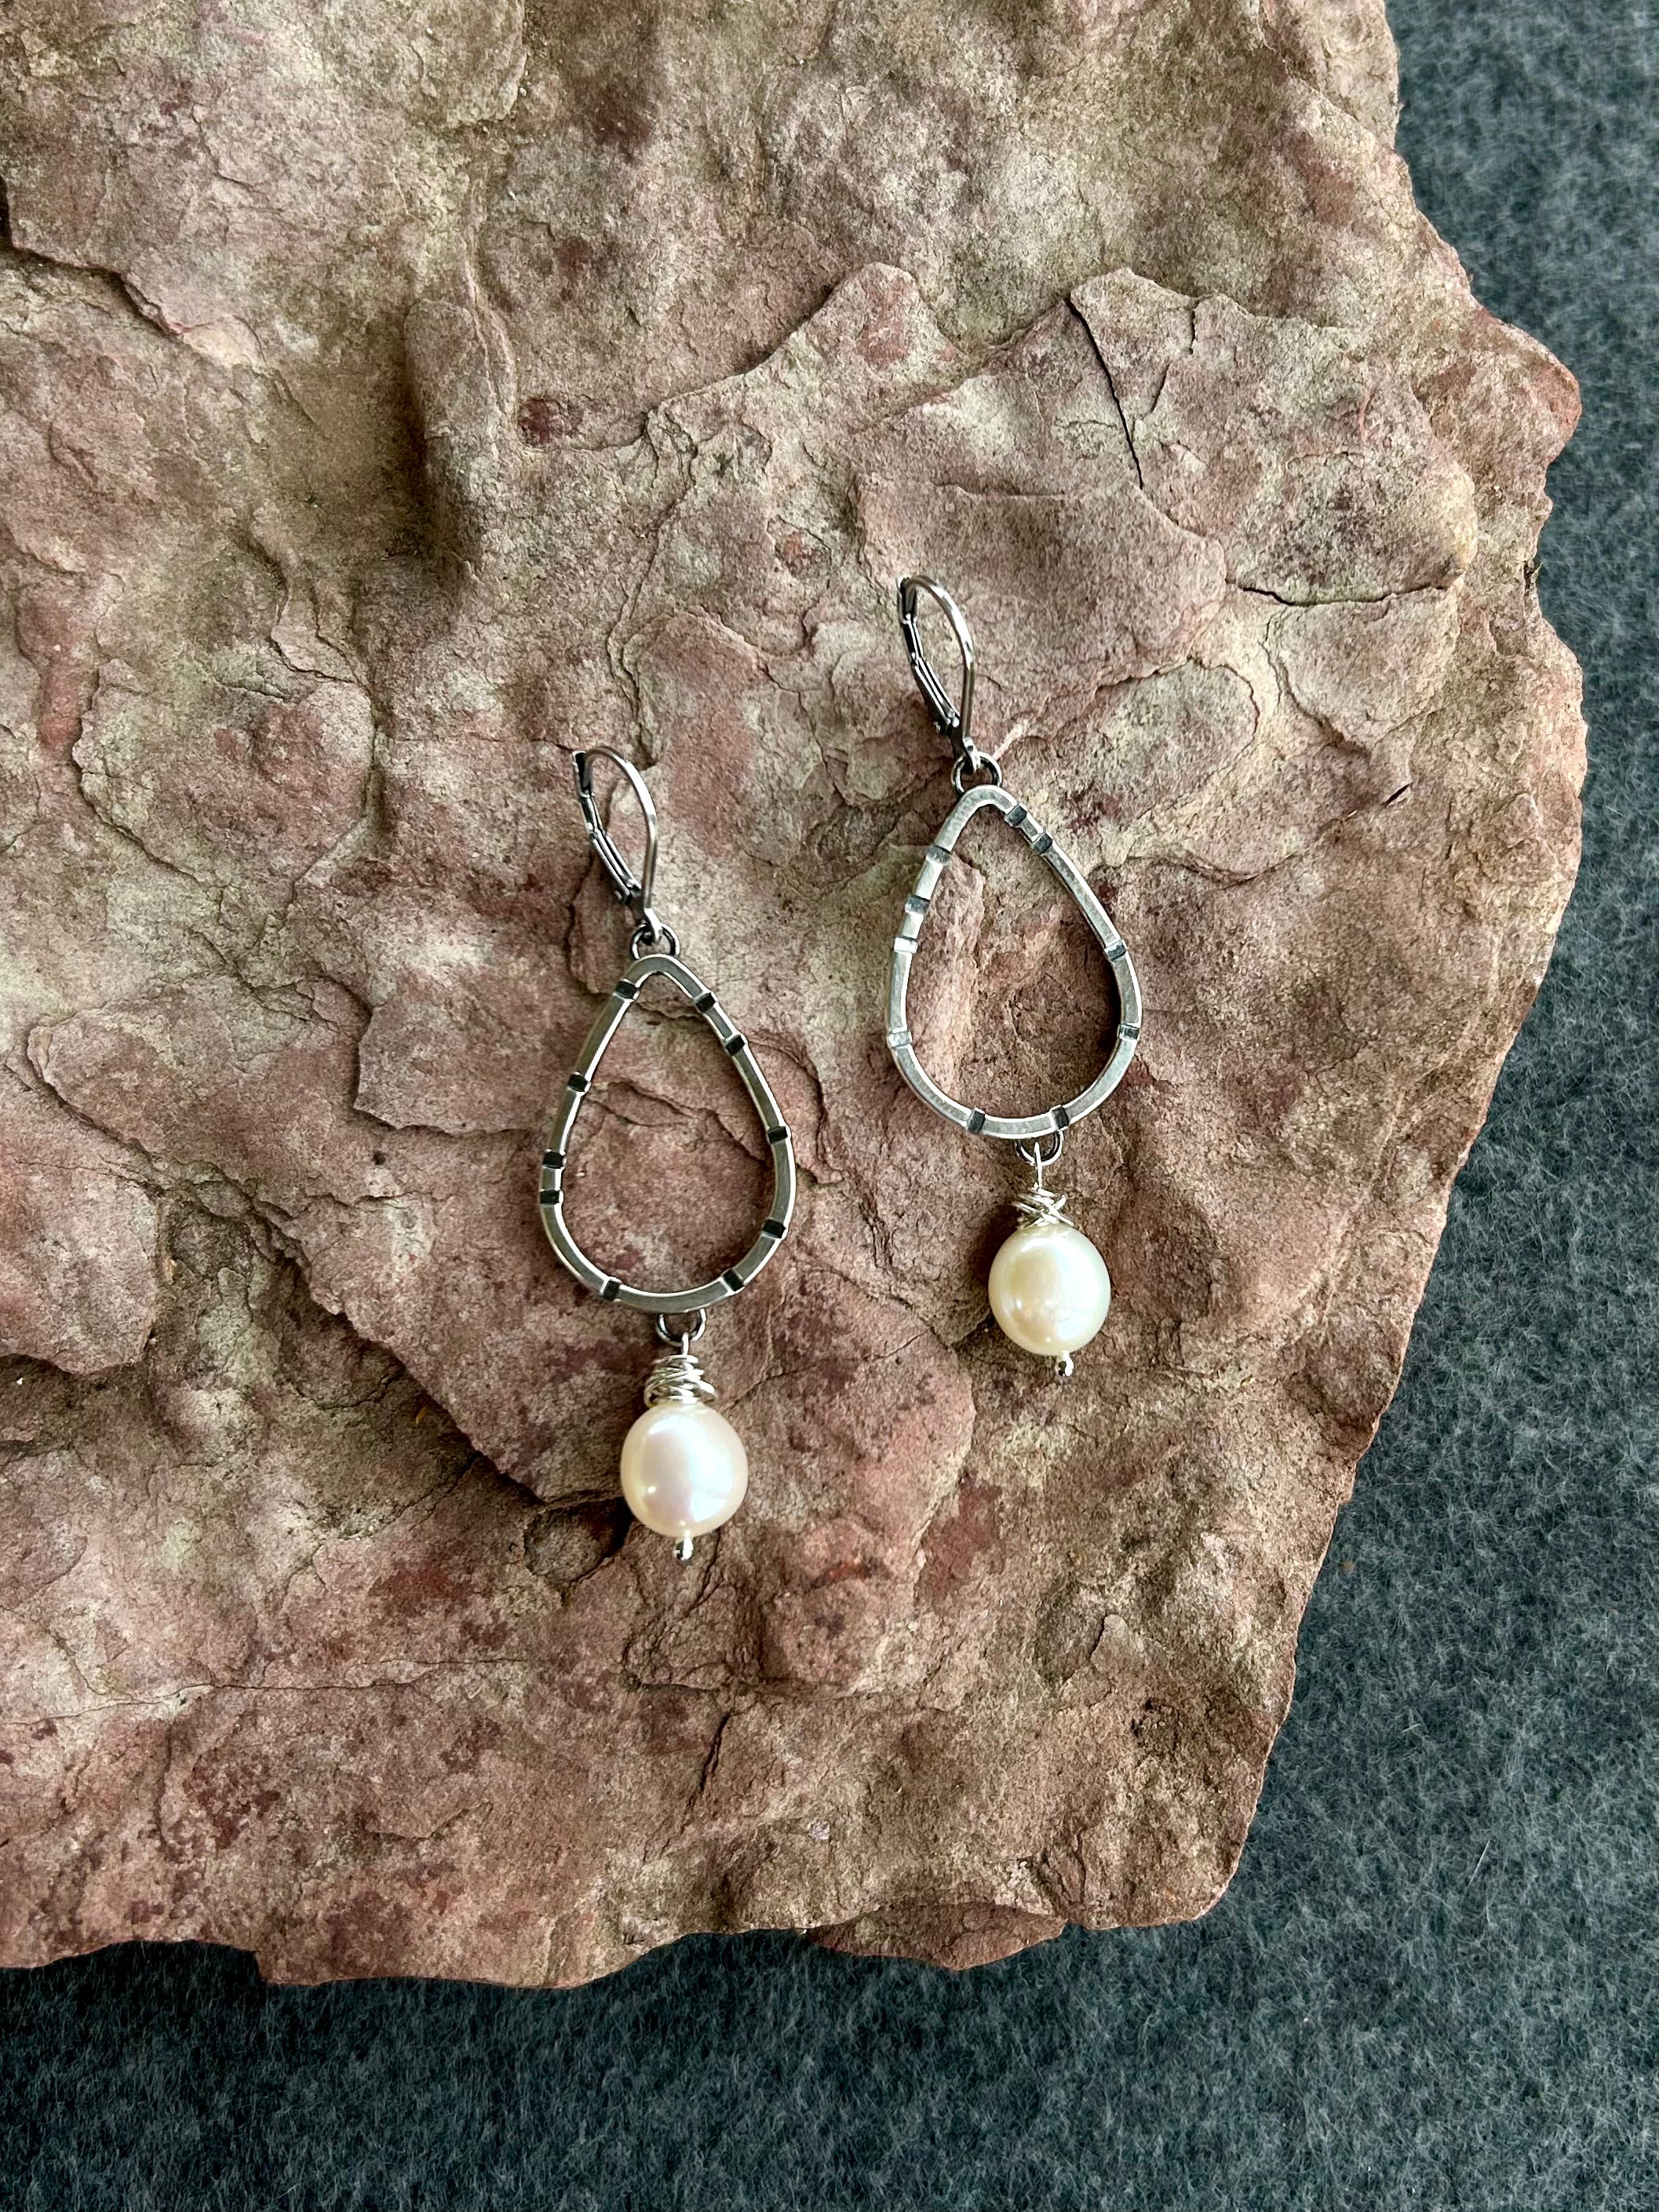 Anvil Hoop Earrings with Stamped Sterling Silver and Freshwater Pearls